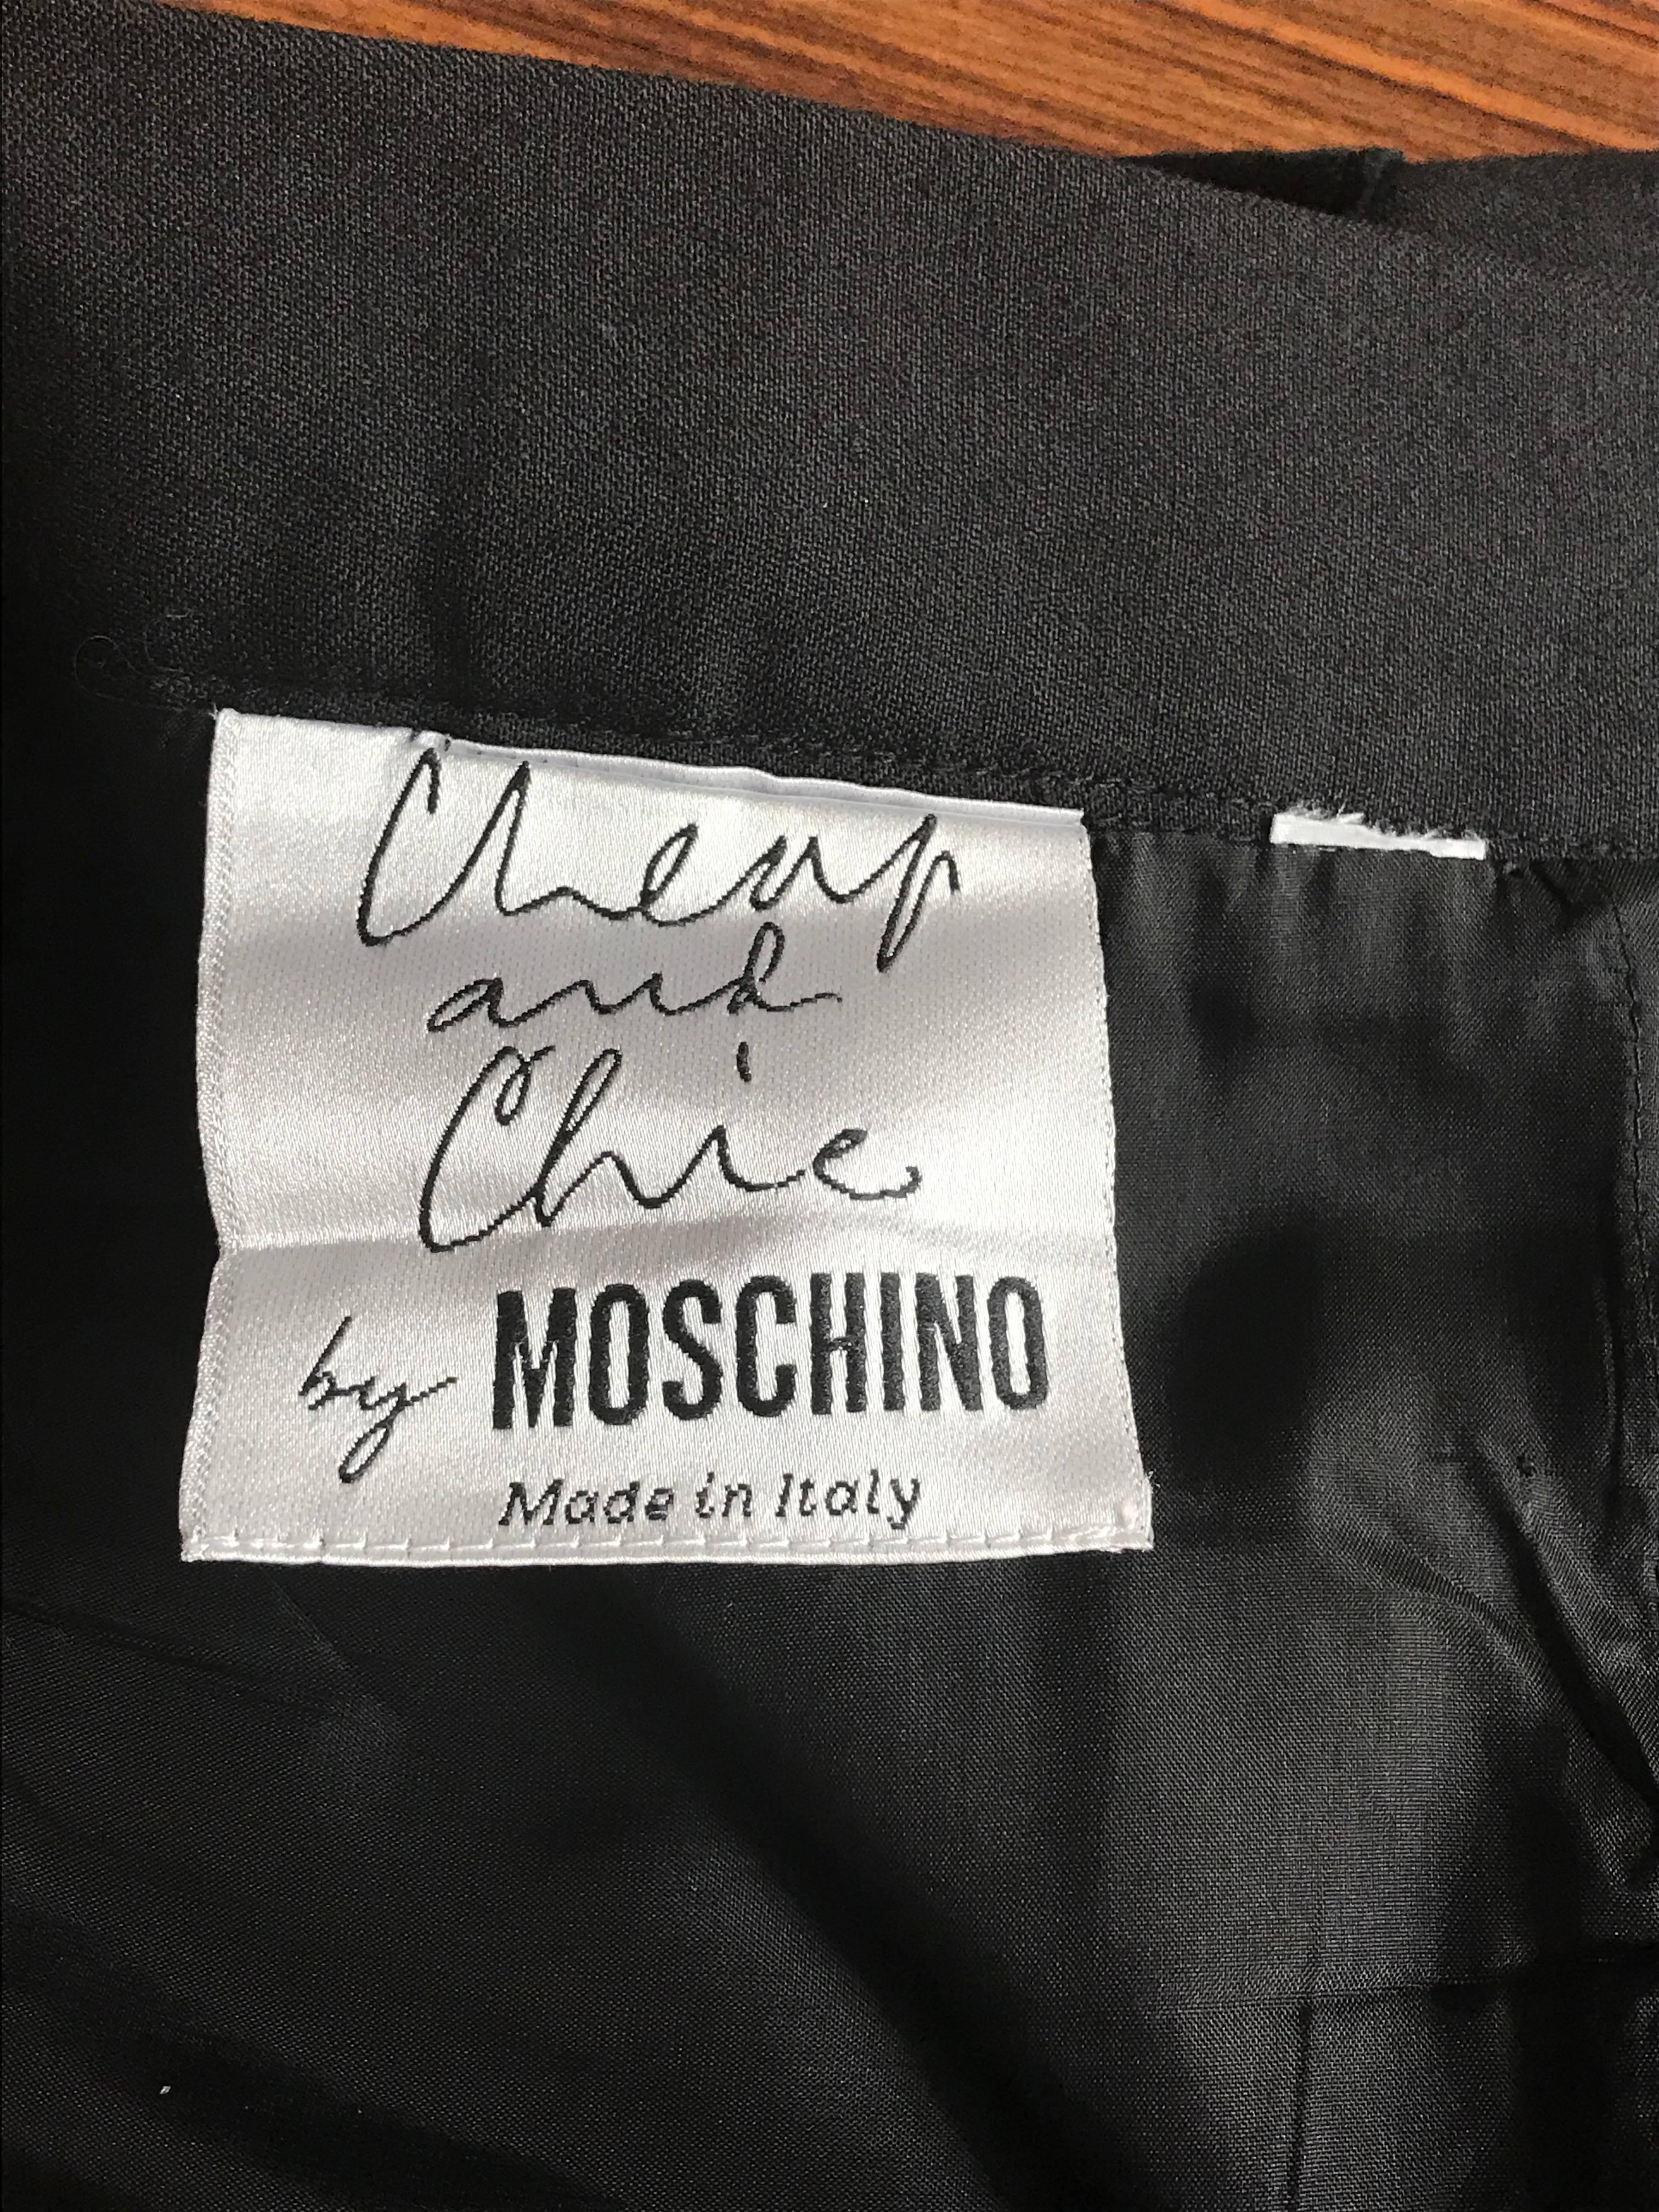 moschino question mark jacket